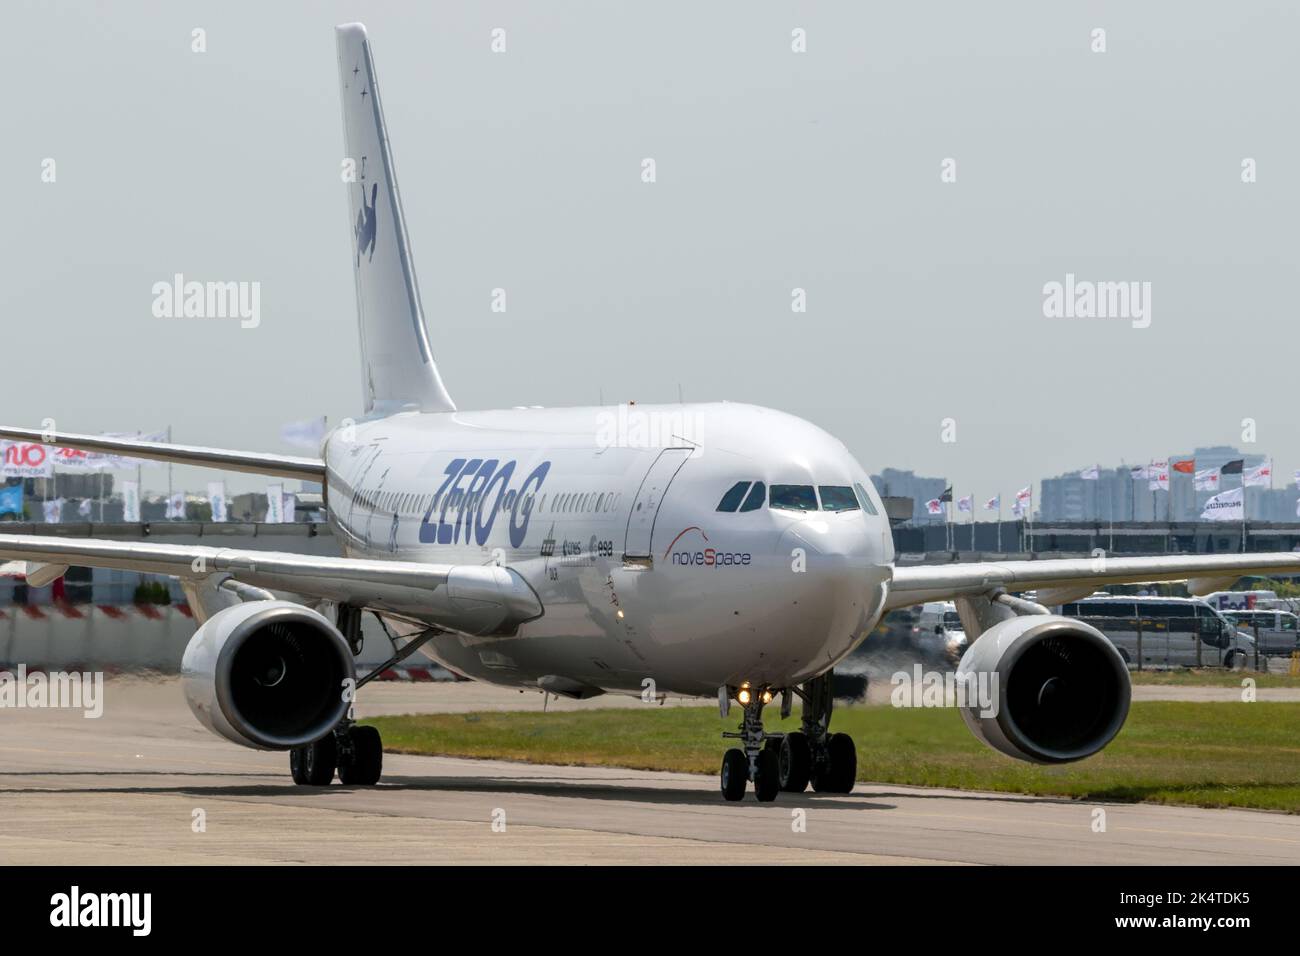 Airbus A310 Zero-G from NoveSpace used for gravity-free flights arriving at Le-Bourget Airport. Paris, France - June 22, 2017 Stock Photo